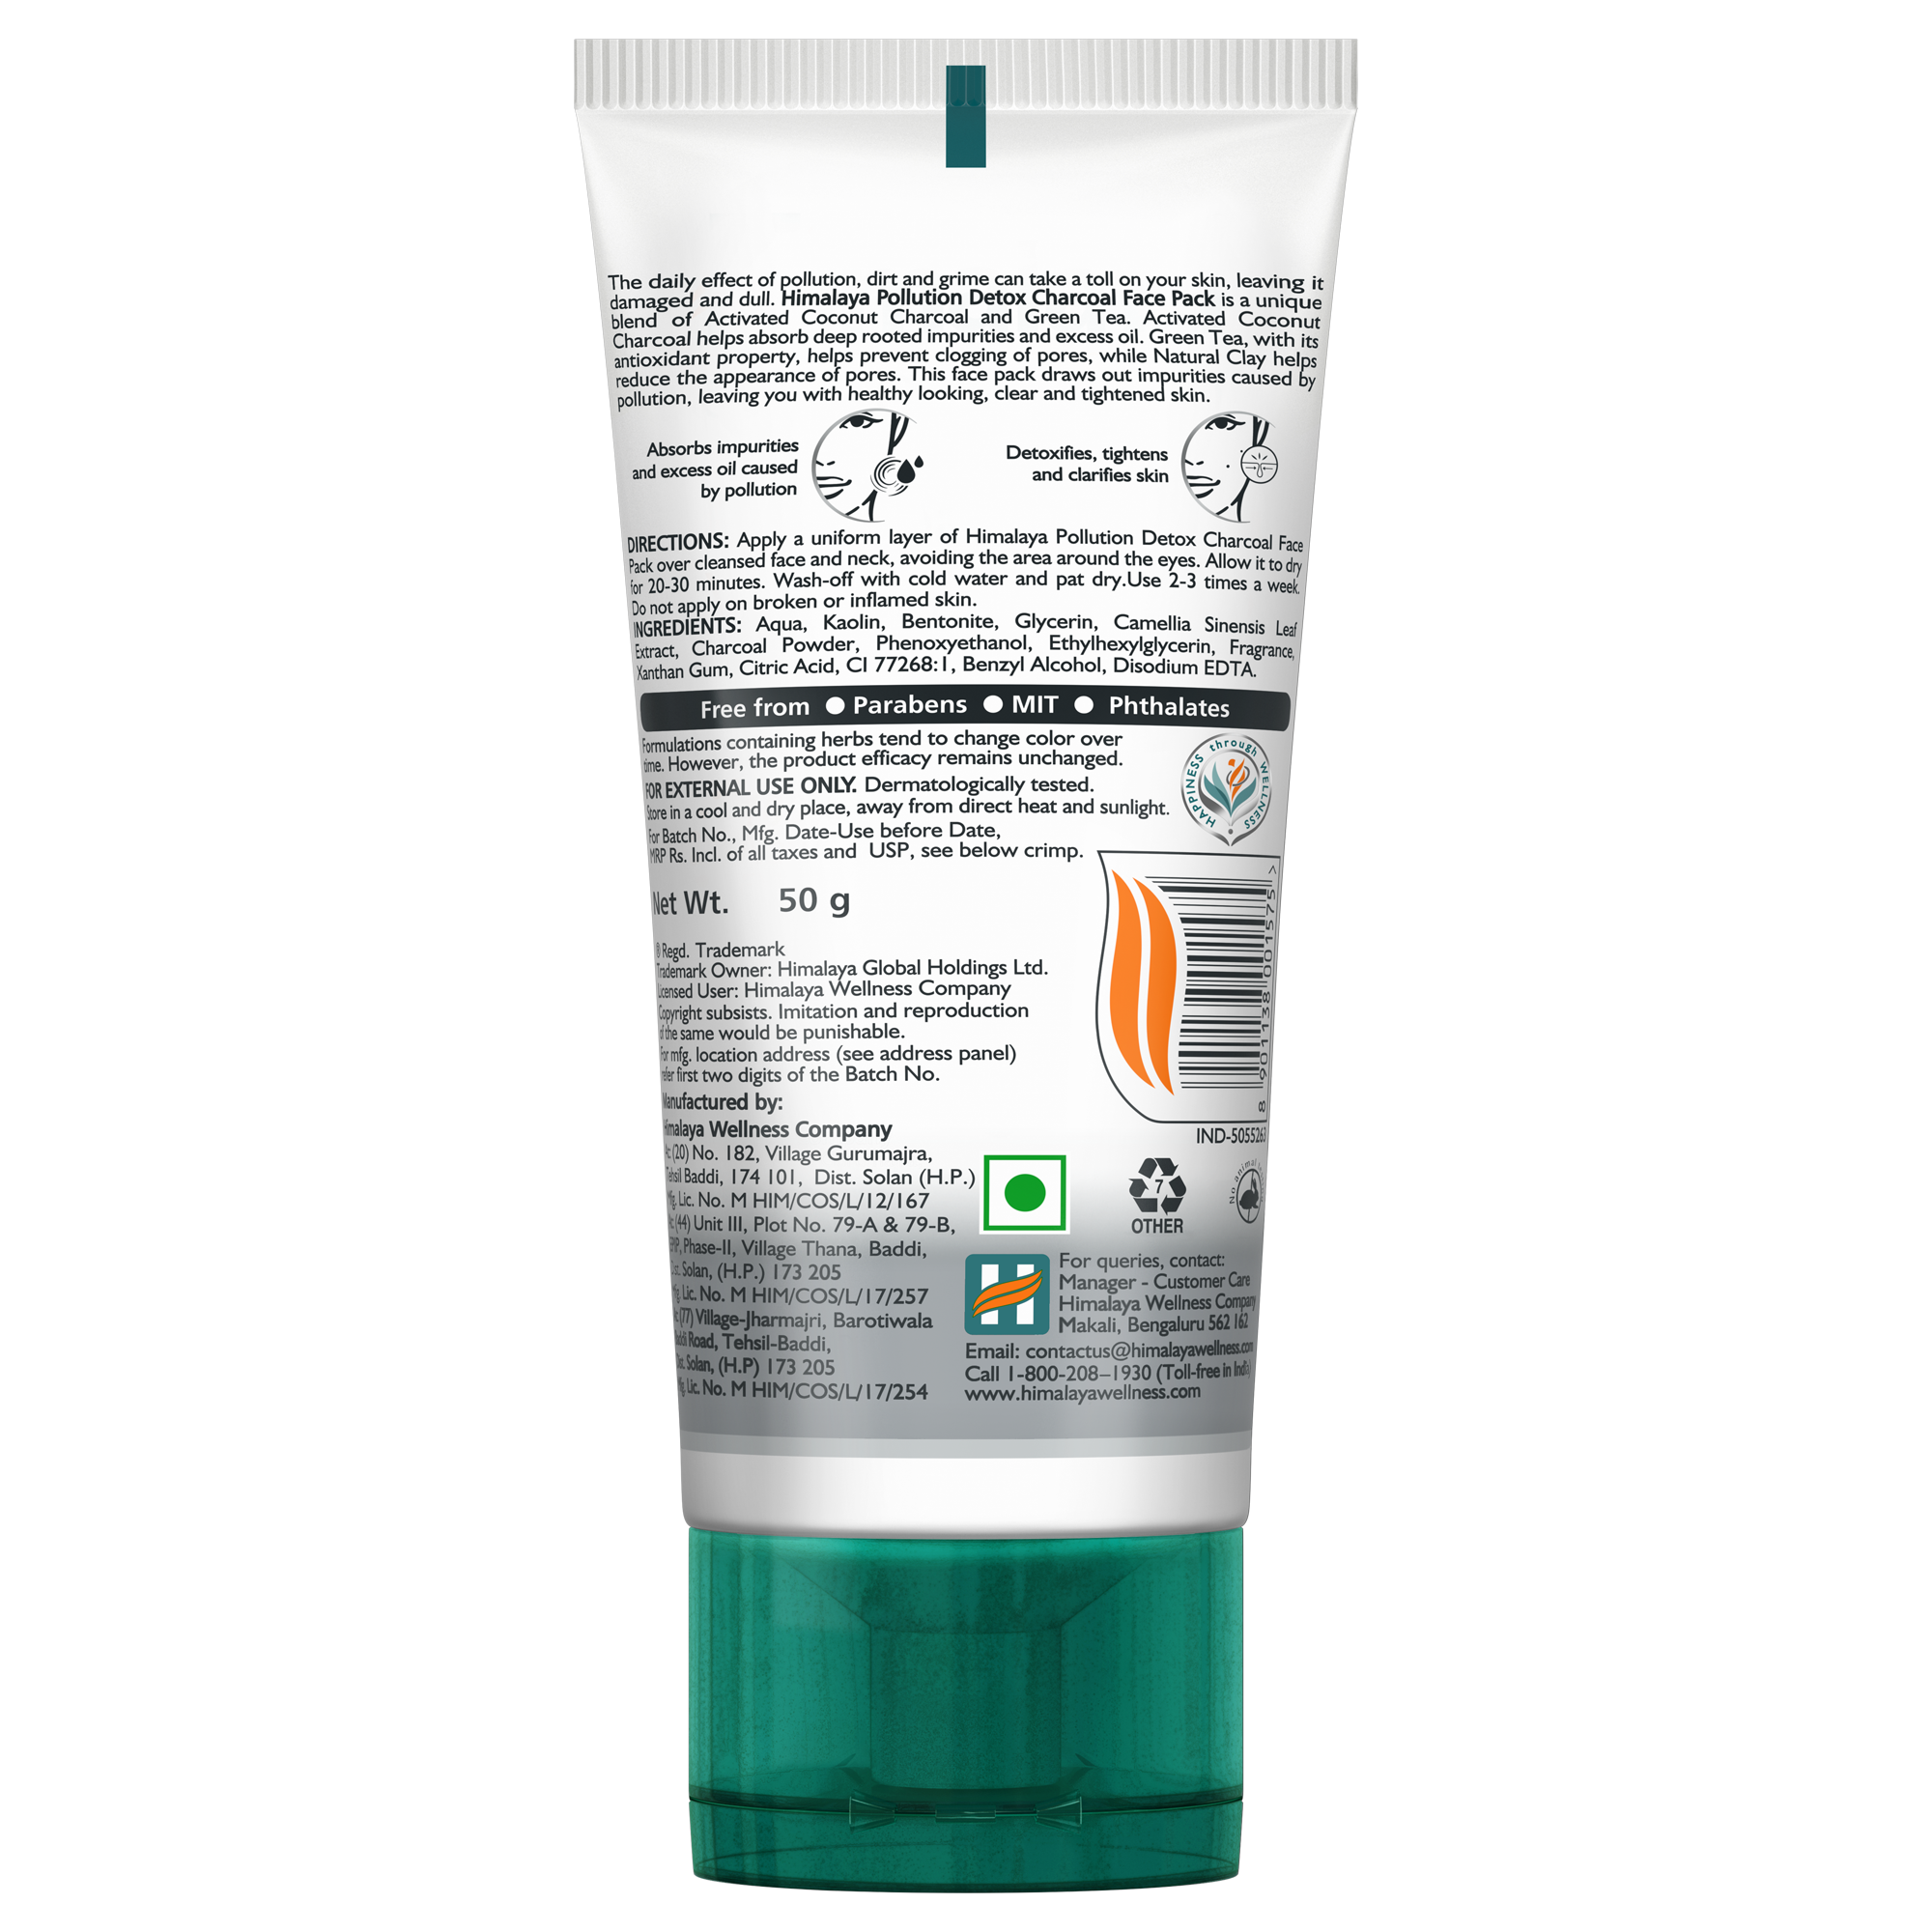 Himalaya Pollution Detox Charcoal Face Pack 50g Ingredients